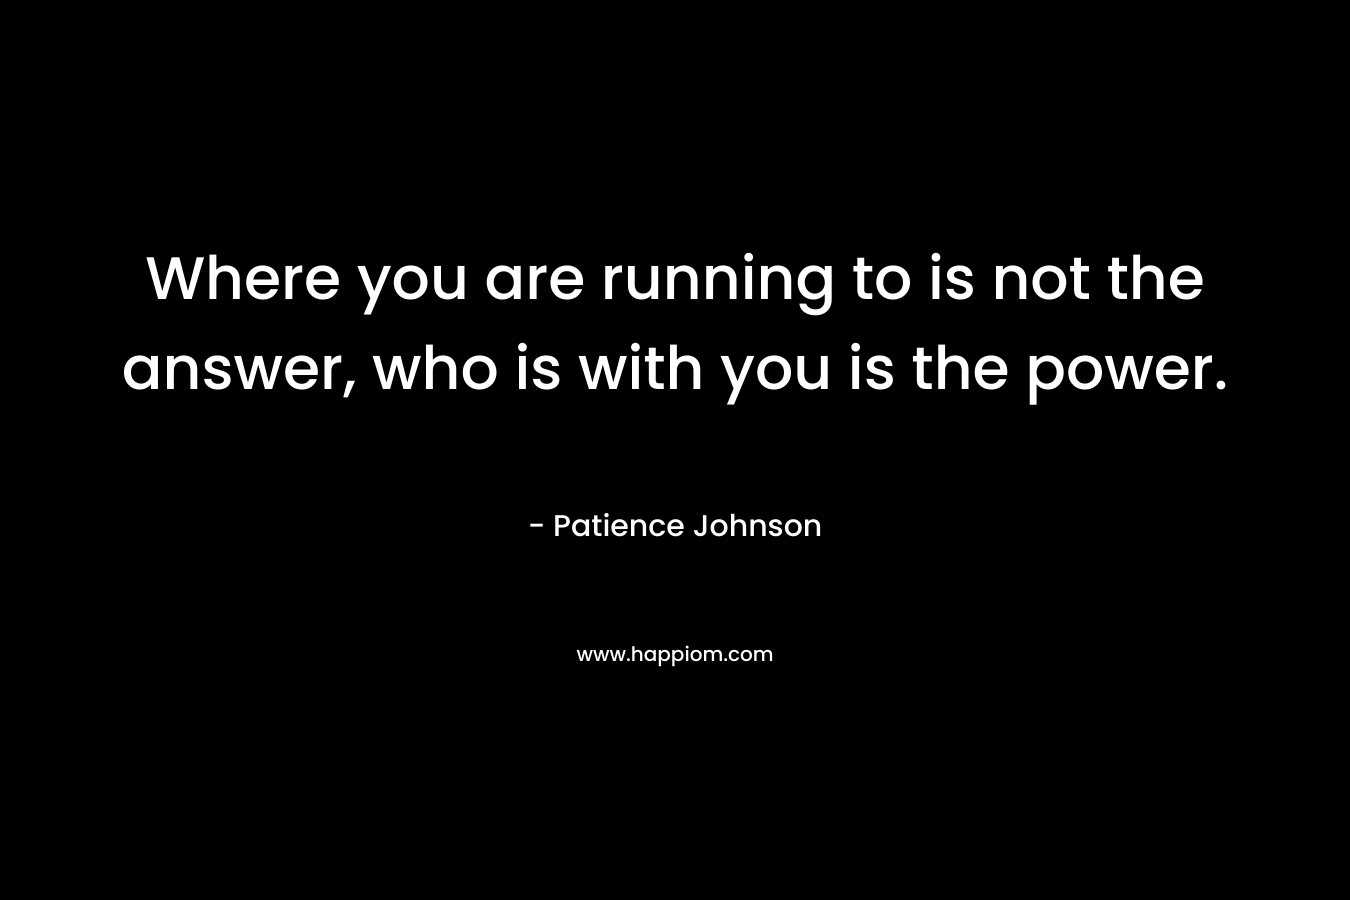 Where you are running to is not the answer, who is with you is the power.